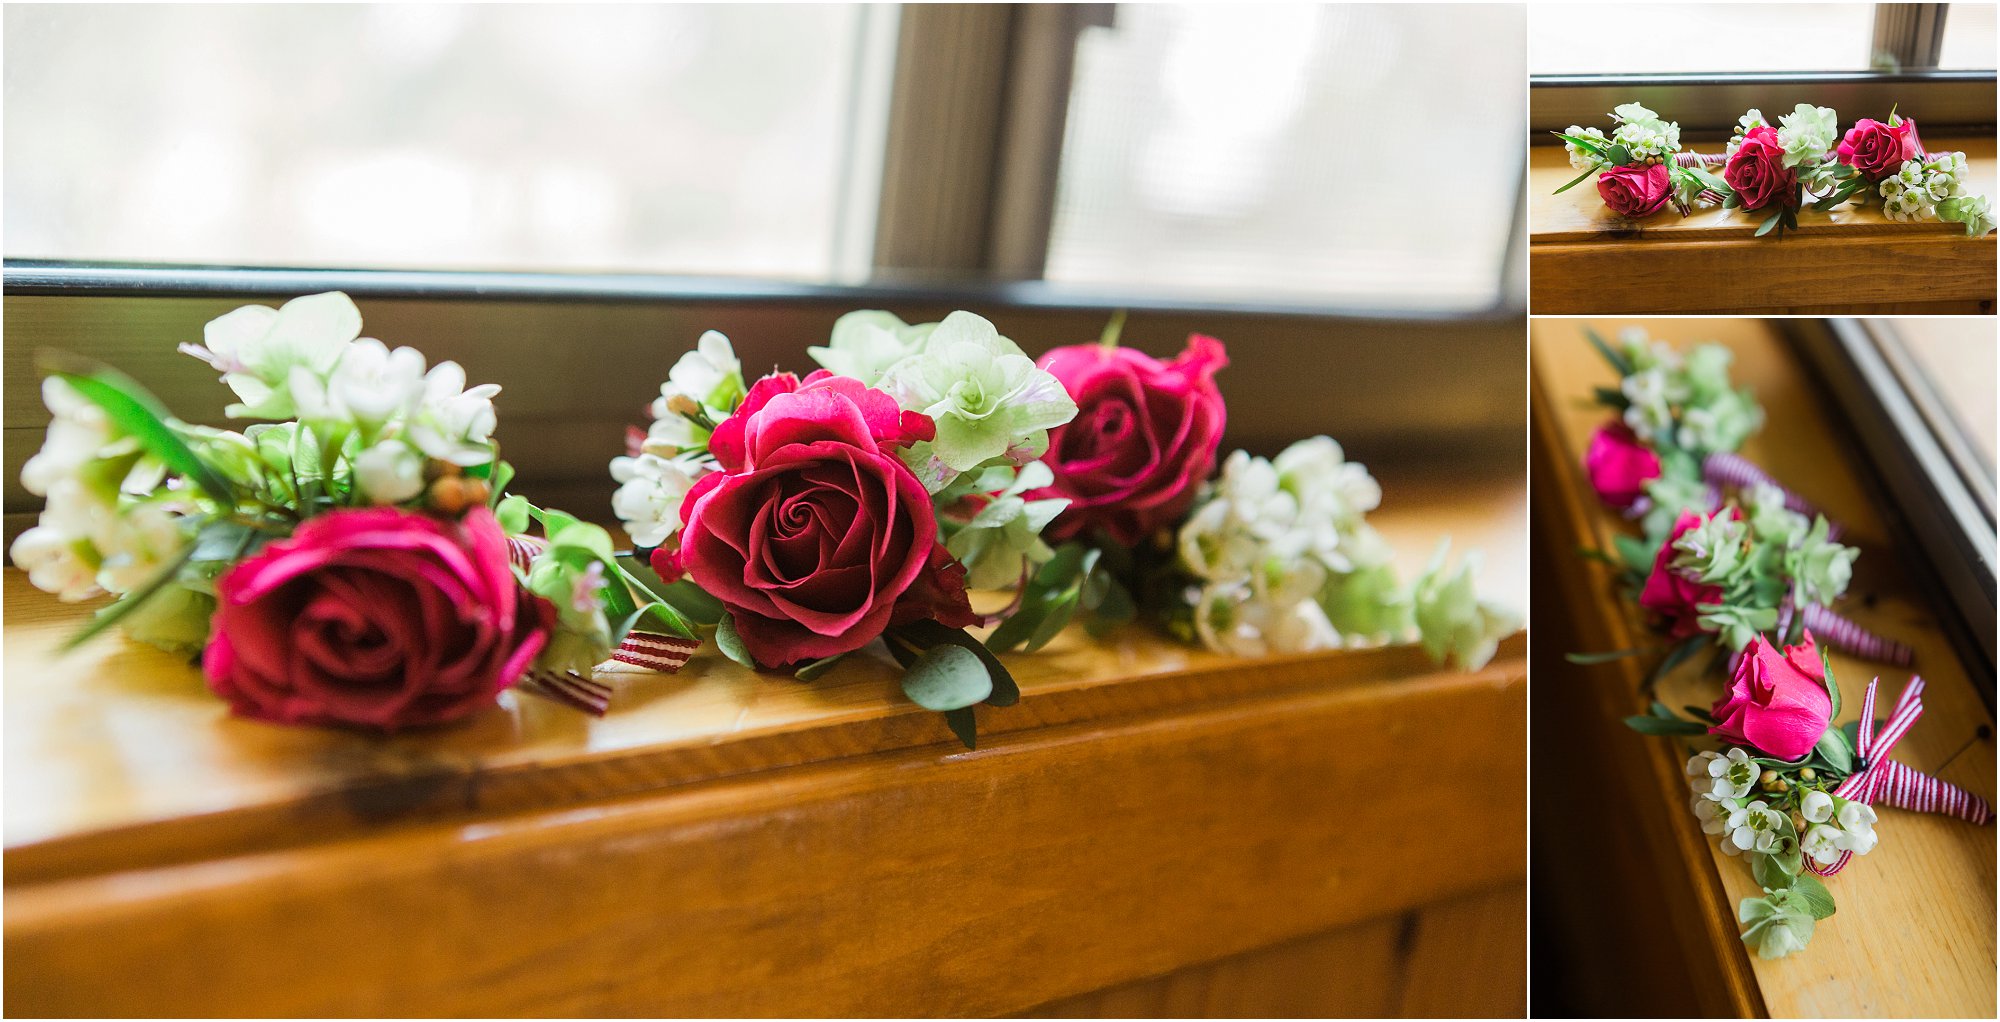 Gorgeous red roses for the groomsmen's boutonnieres by Heirloom Floral for this Rock Springs Ranch Wedding in Tumalo, OR. | Erica Swantek Photography